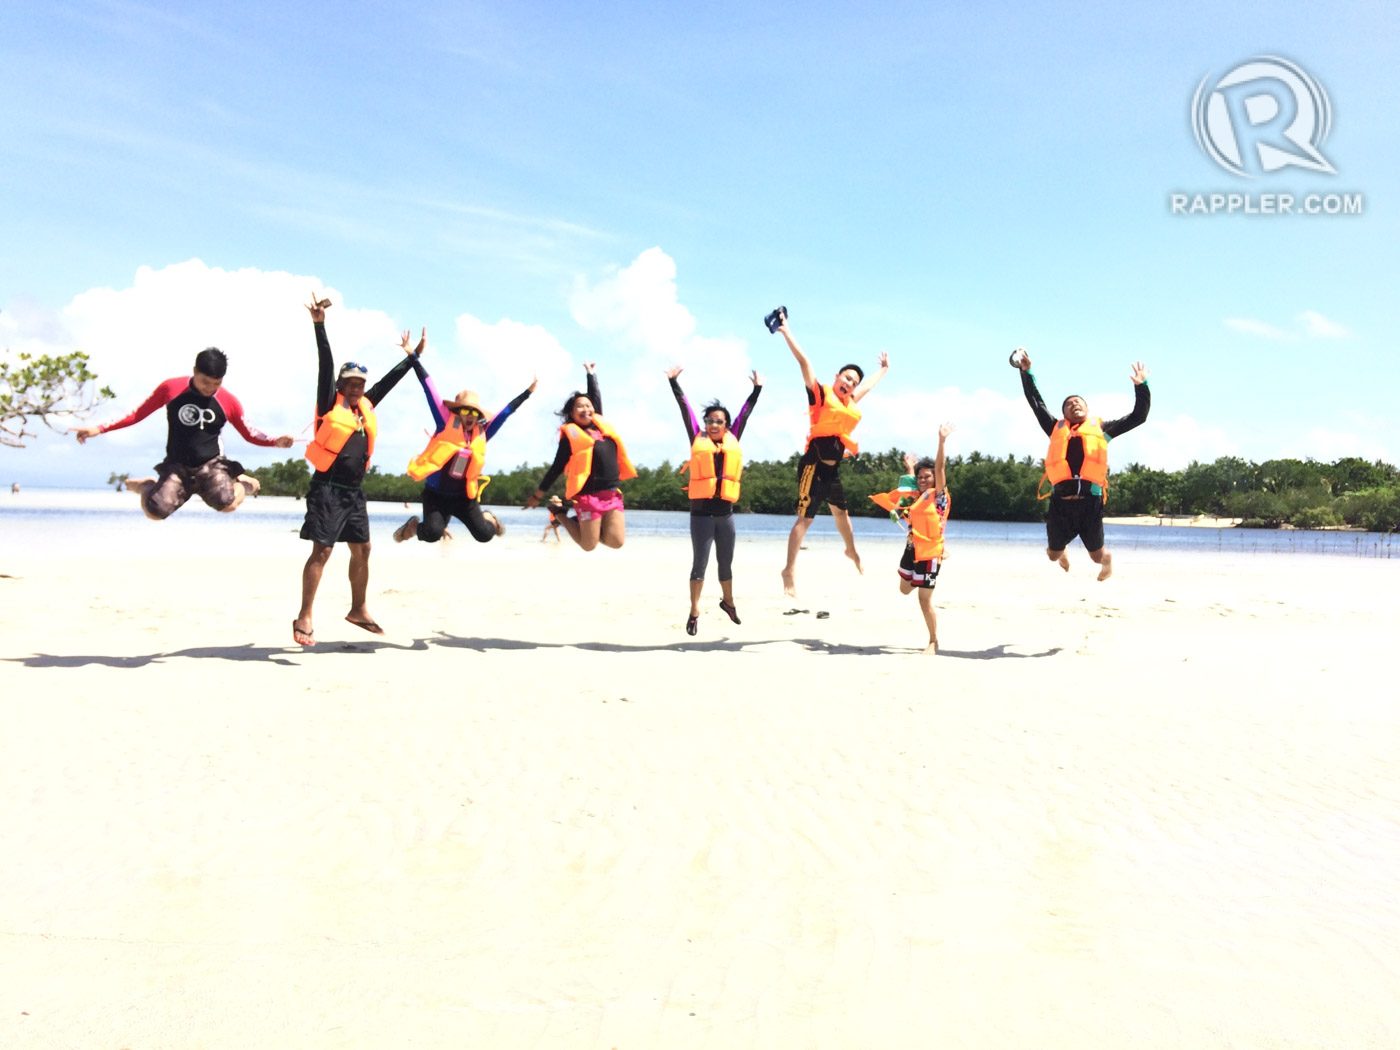 JUMPSHOT IN PARADISE. Schedule a trip to Cagbalete with your barkada and beat the heat this summer! Photo by Eloi Pramis   